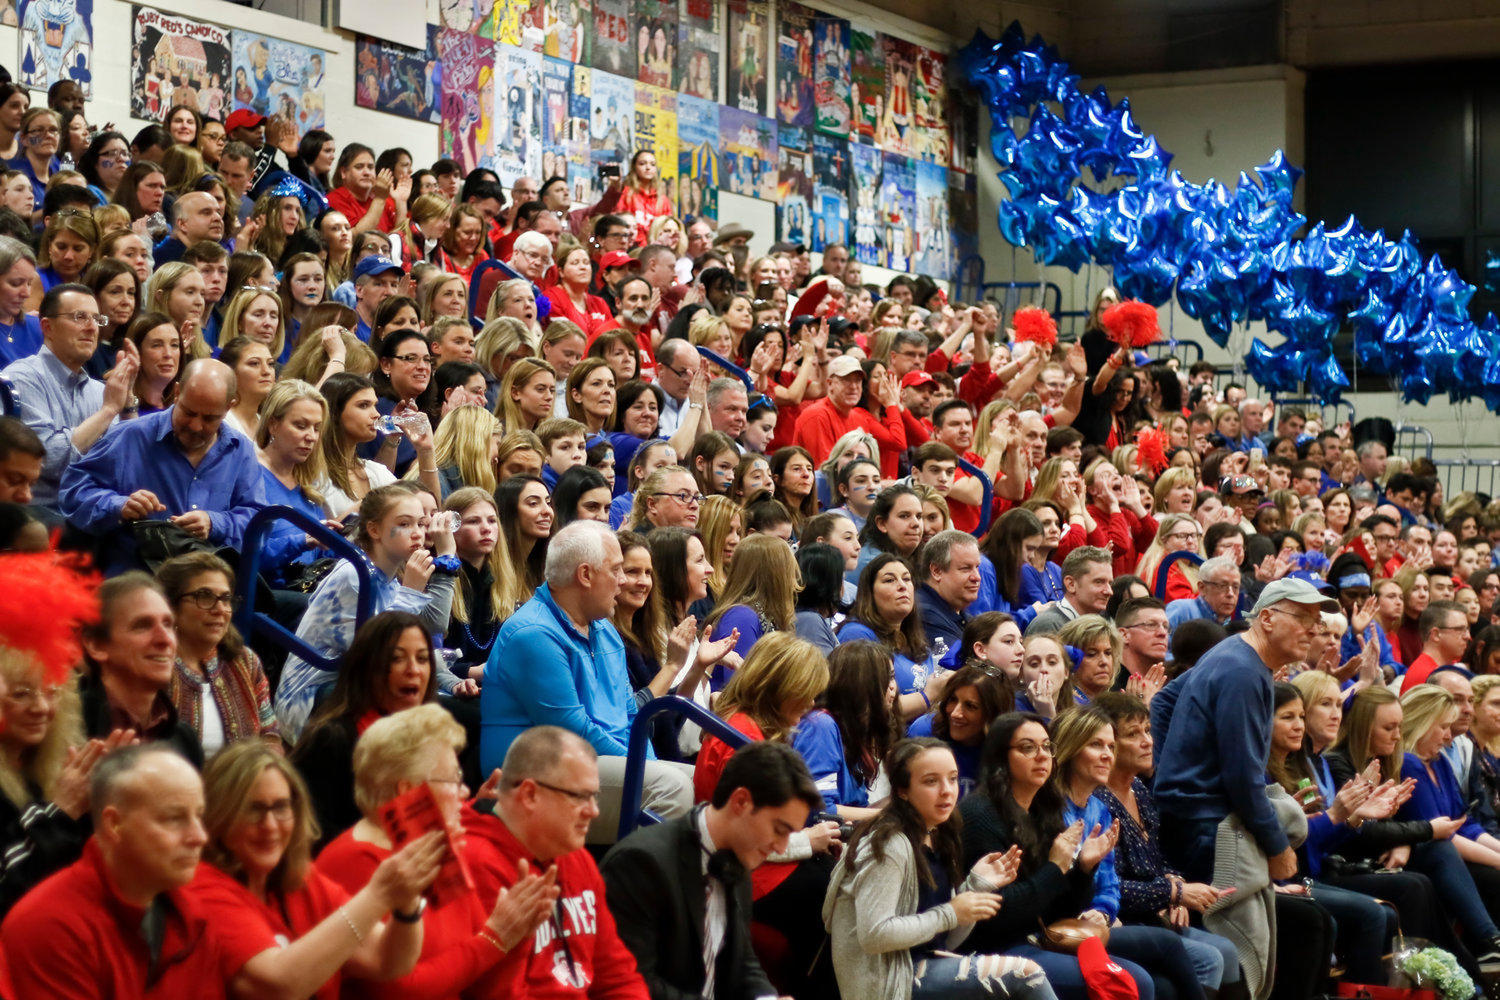 After parents and students expressed disappointment over a tentative plan for the annual Red and Blue competition in March, school officials said they were still mulling options on how to ensure safety while keeping the tradition alive, which includes coming up with a policy on spectators. At left, hundreds of people attended a past event.